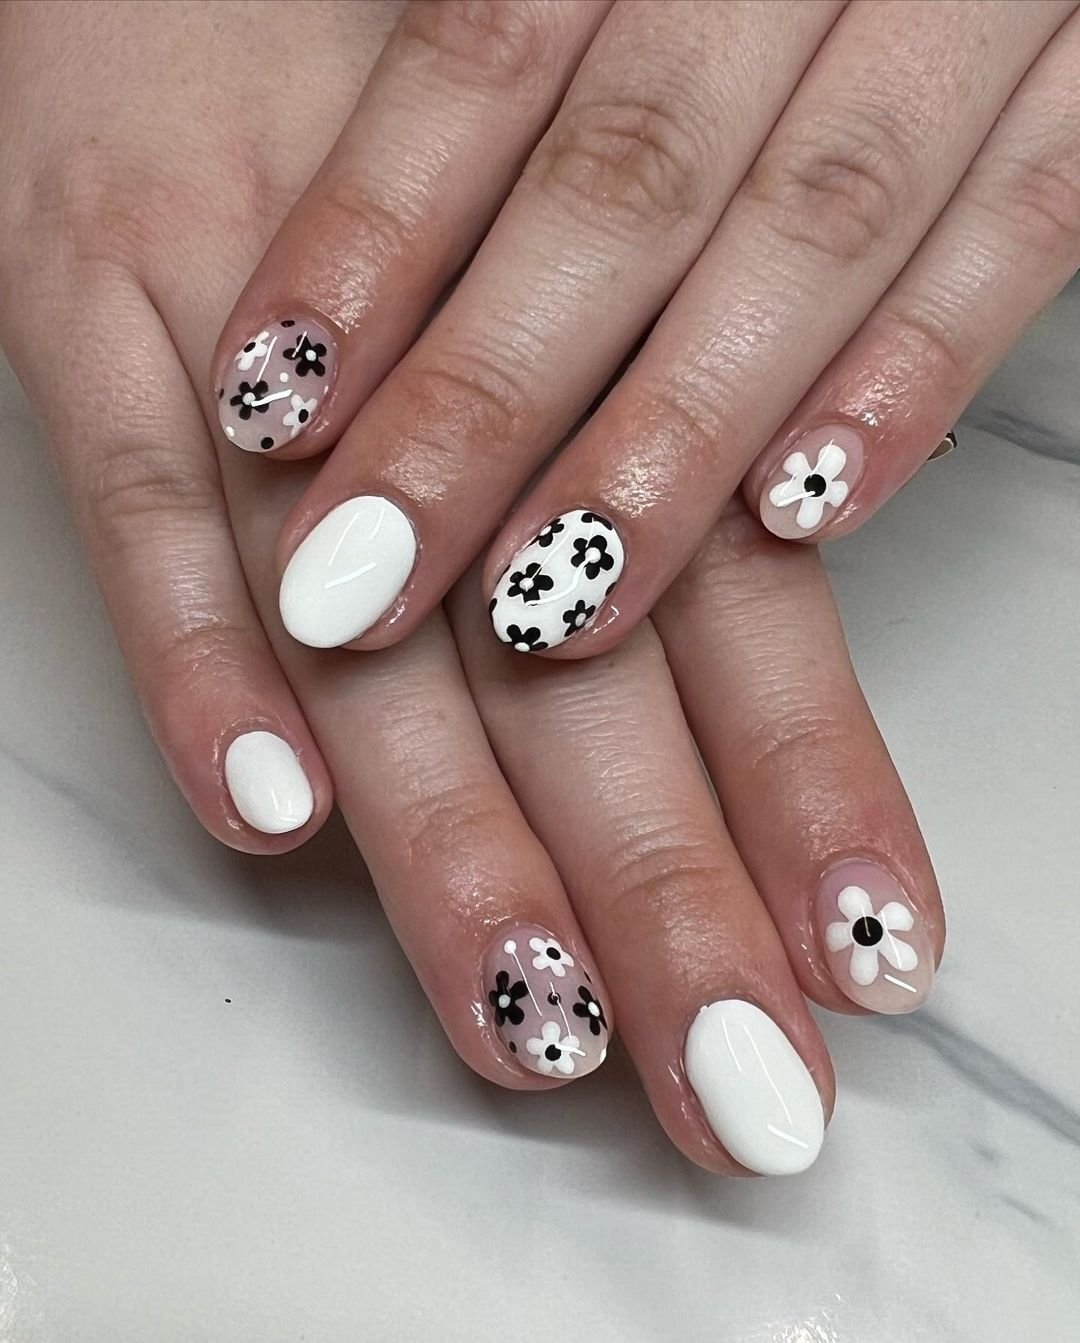 26 - Picture of Black and White Nails